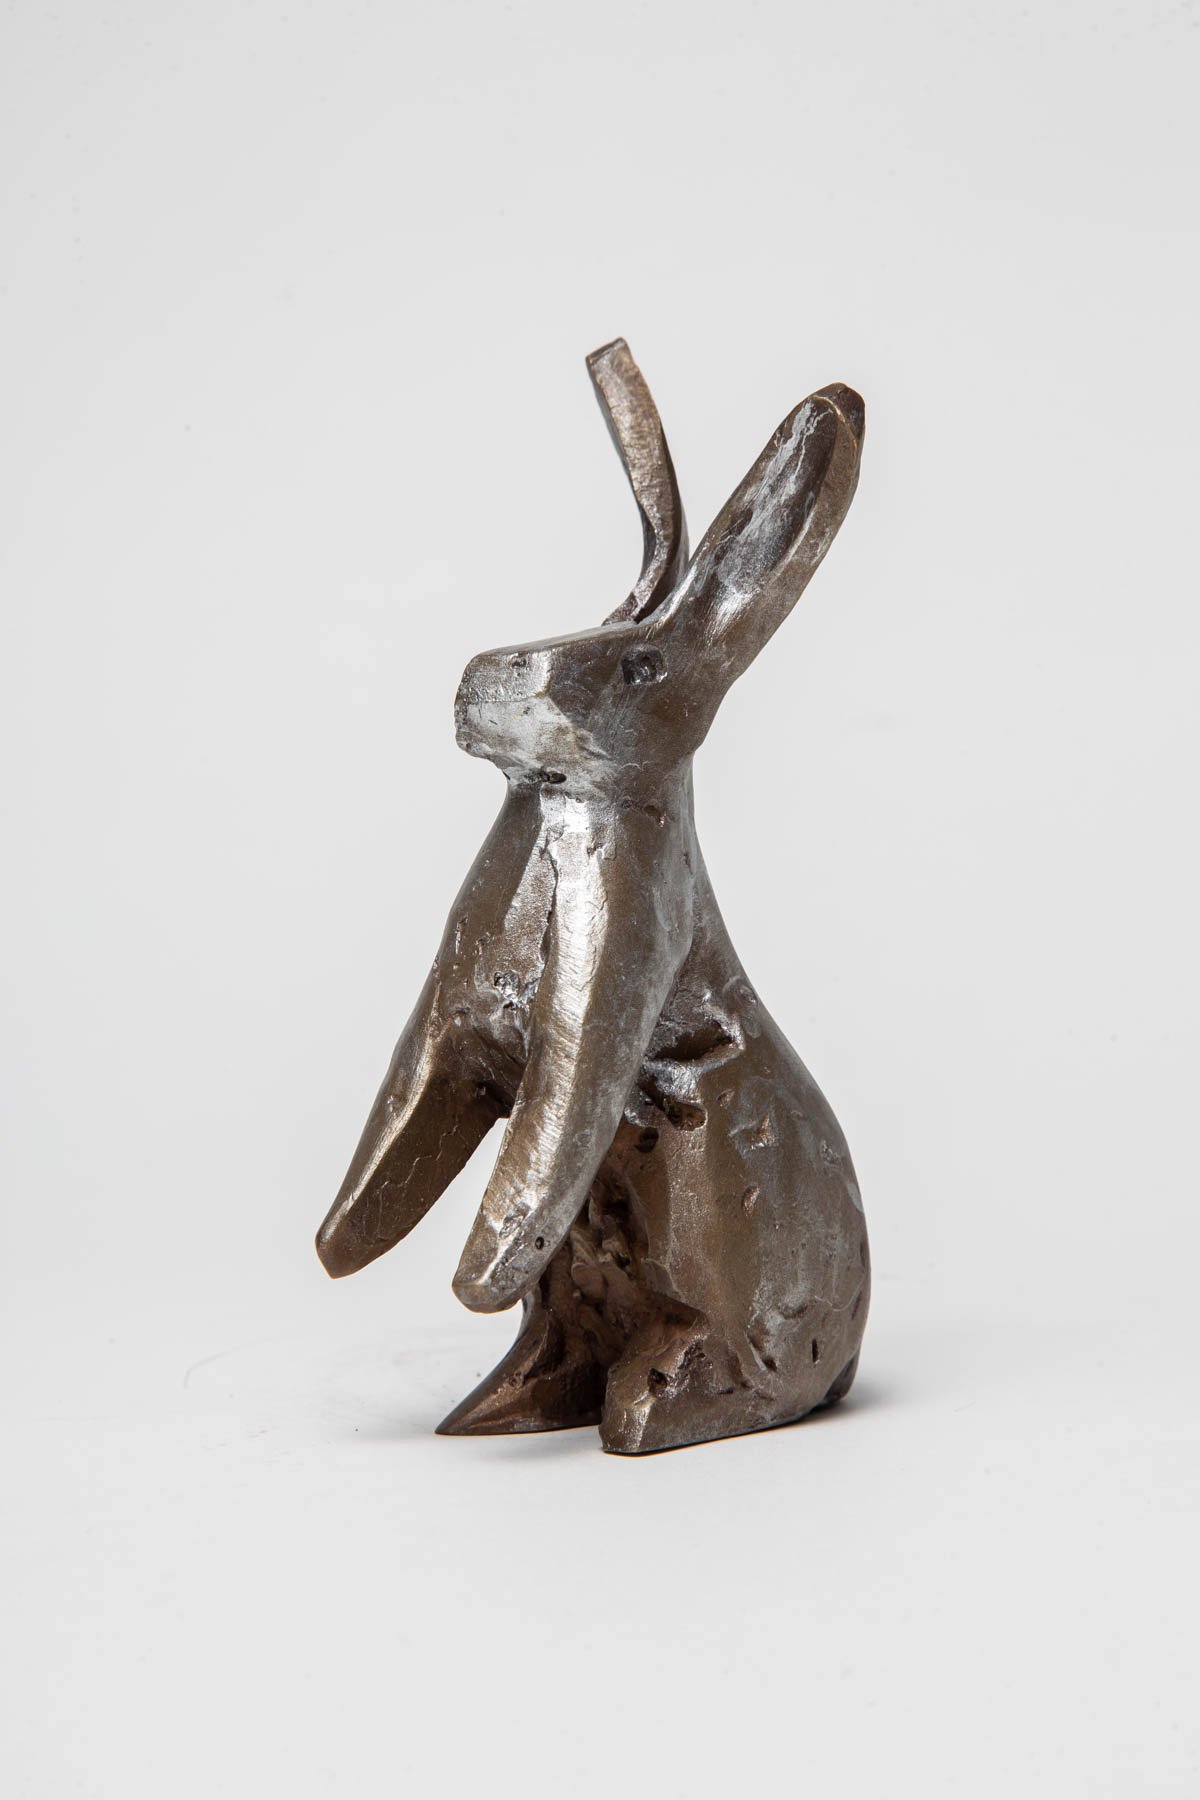 Chess_pawn_Hare_Marney.JPG